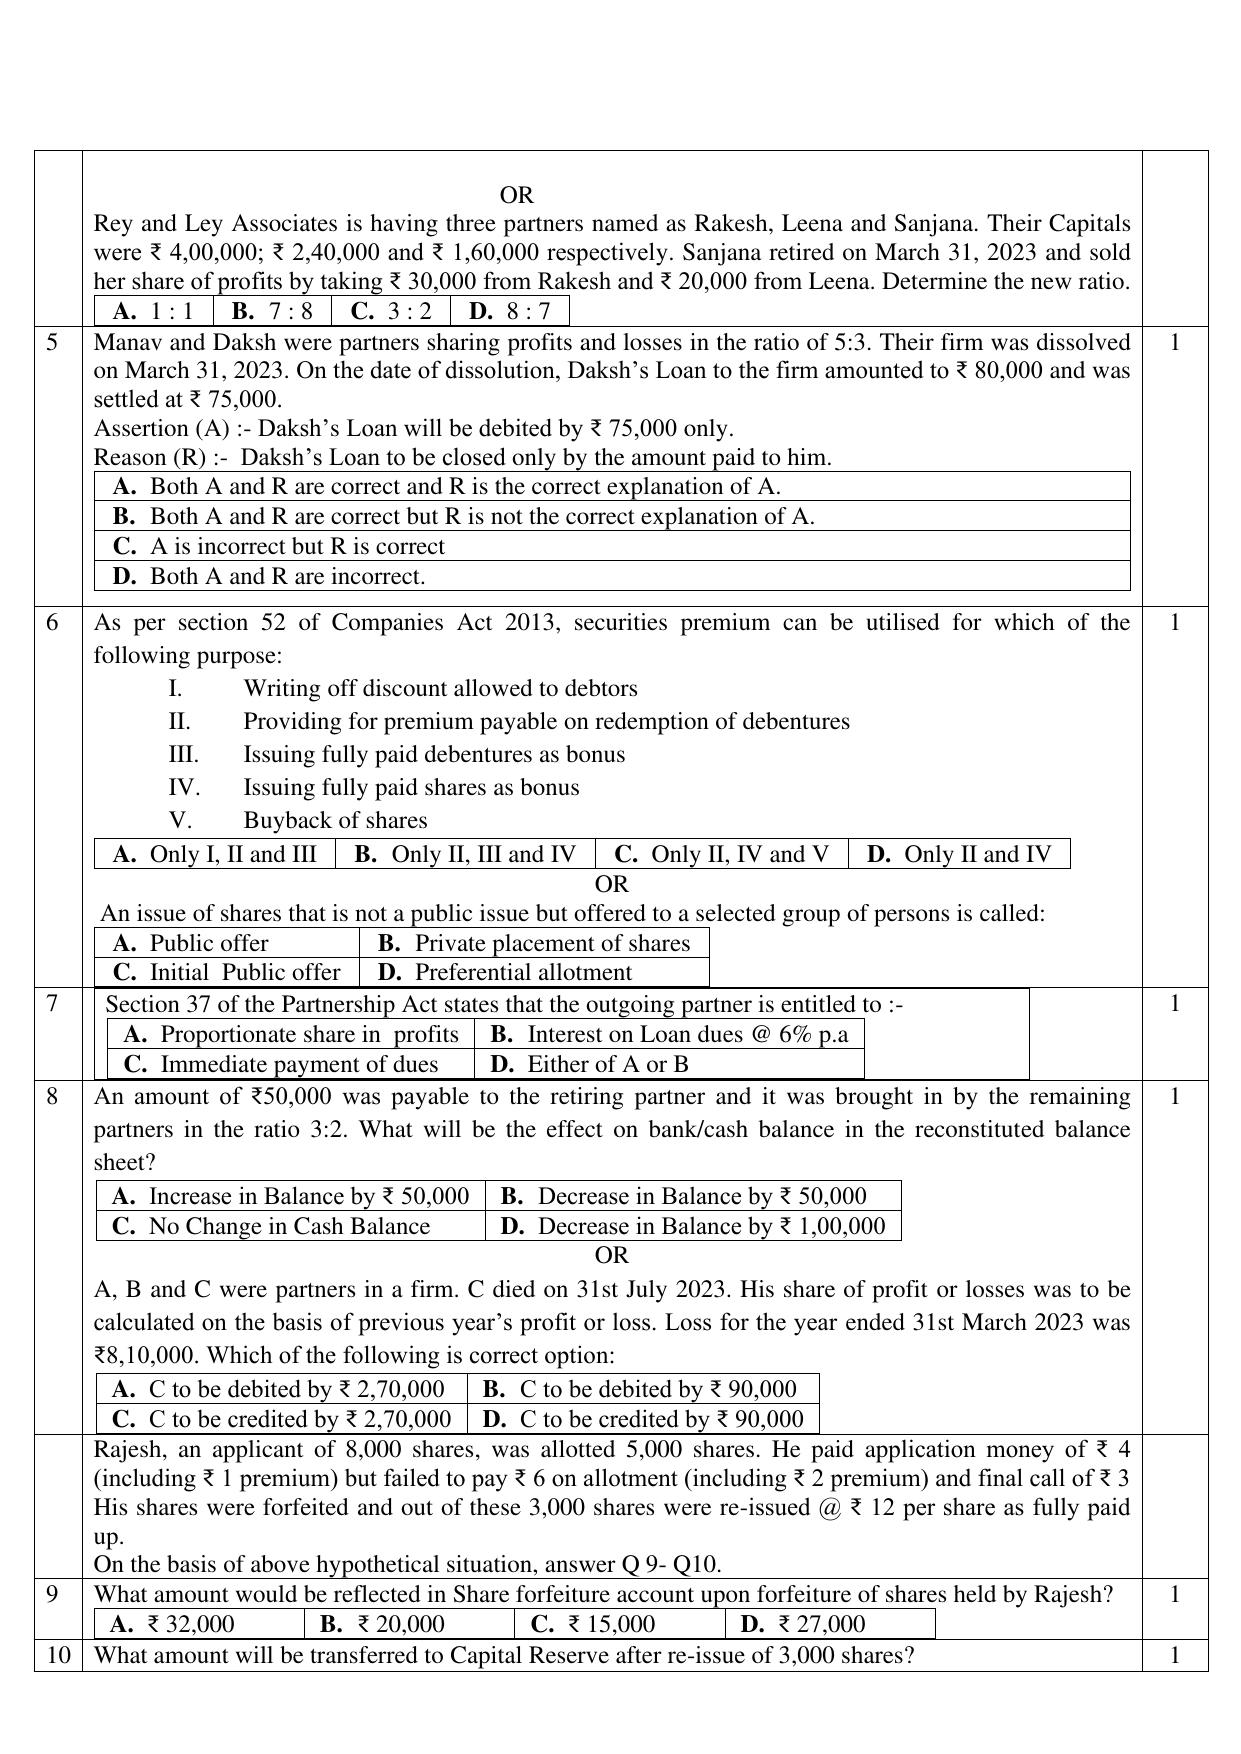 CBSE Class 12 Accountancy SET 2 Practice Questions 2023-24  - Page 2